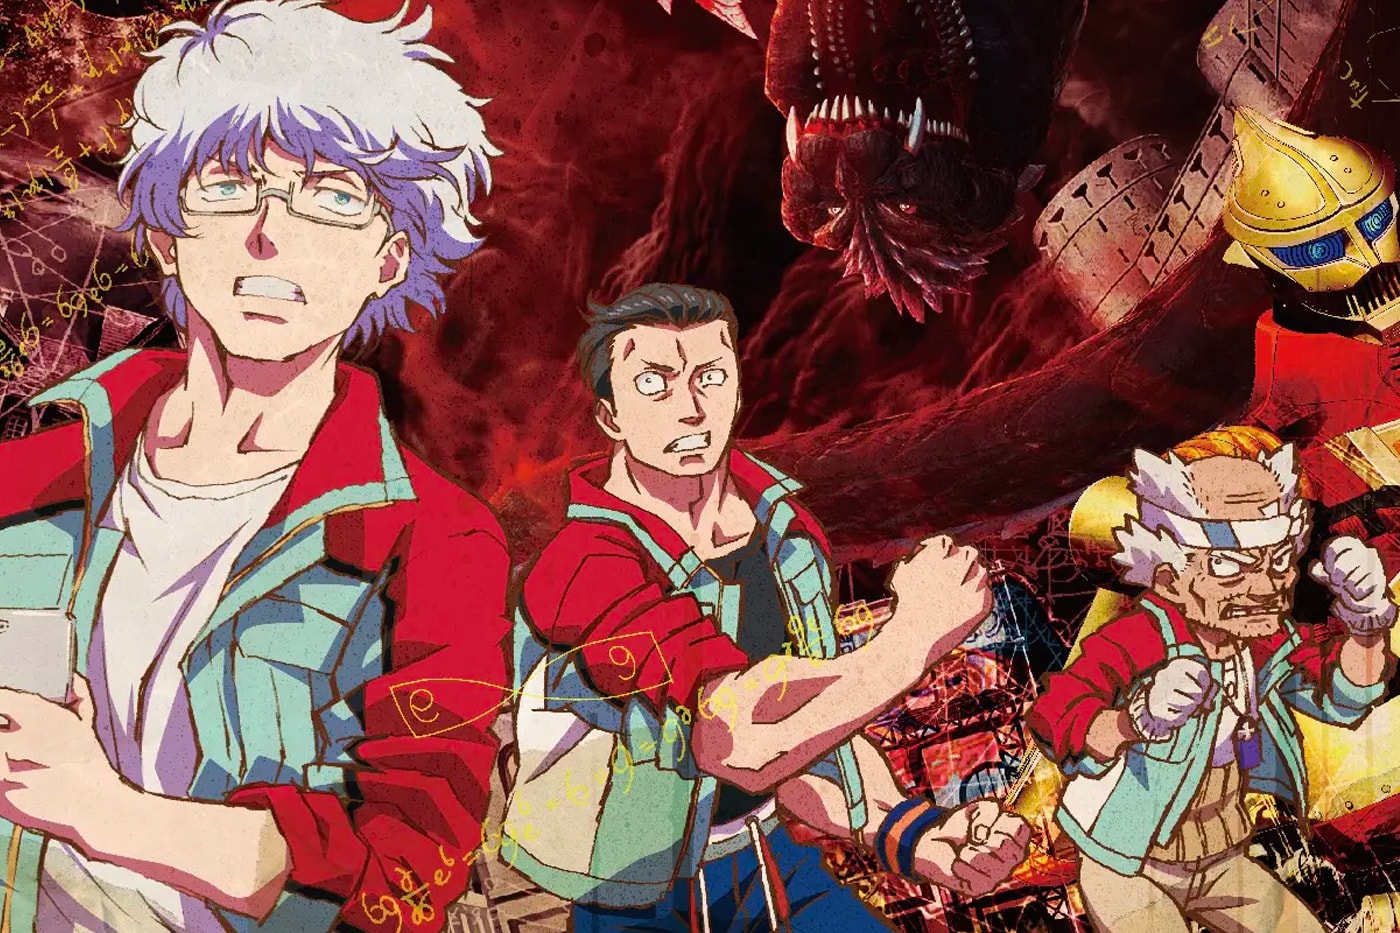 Netflix announces eight new Anime titles - and they all look incredible